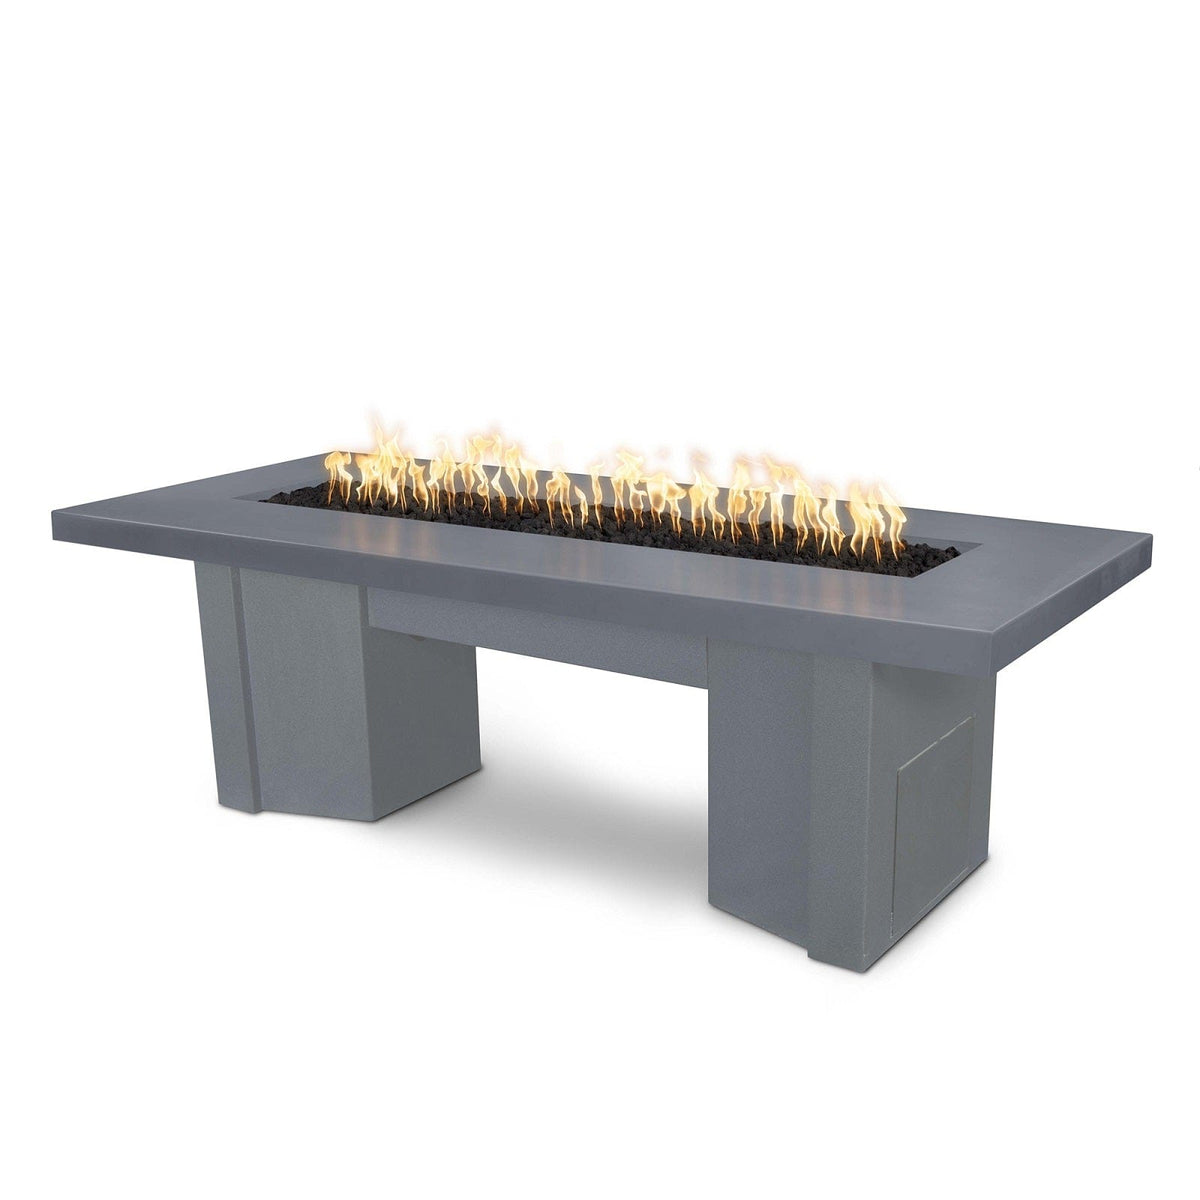 The Outdoor Plus Fire Features Gray (-GRY) / Gray Powder Coated Steel (-GRY) The Outdoor Plus 78&quot; Alameda Fire Table Smooth Concrete in Liquid Propane - Flame Sense System with Push Button Spark Igniter / OPT-ALMGFRC78FSEN-LP